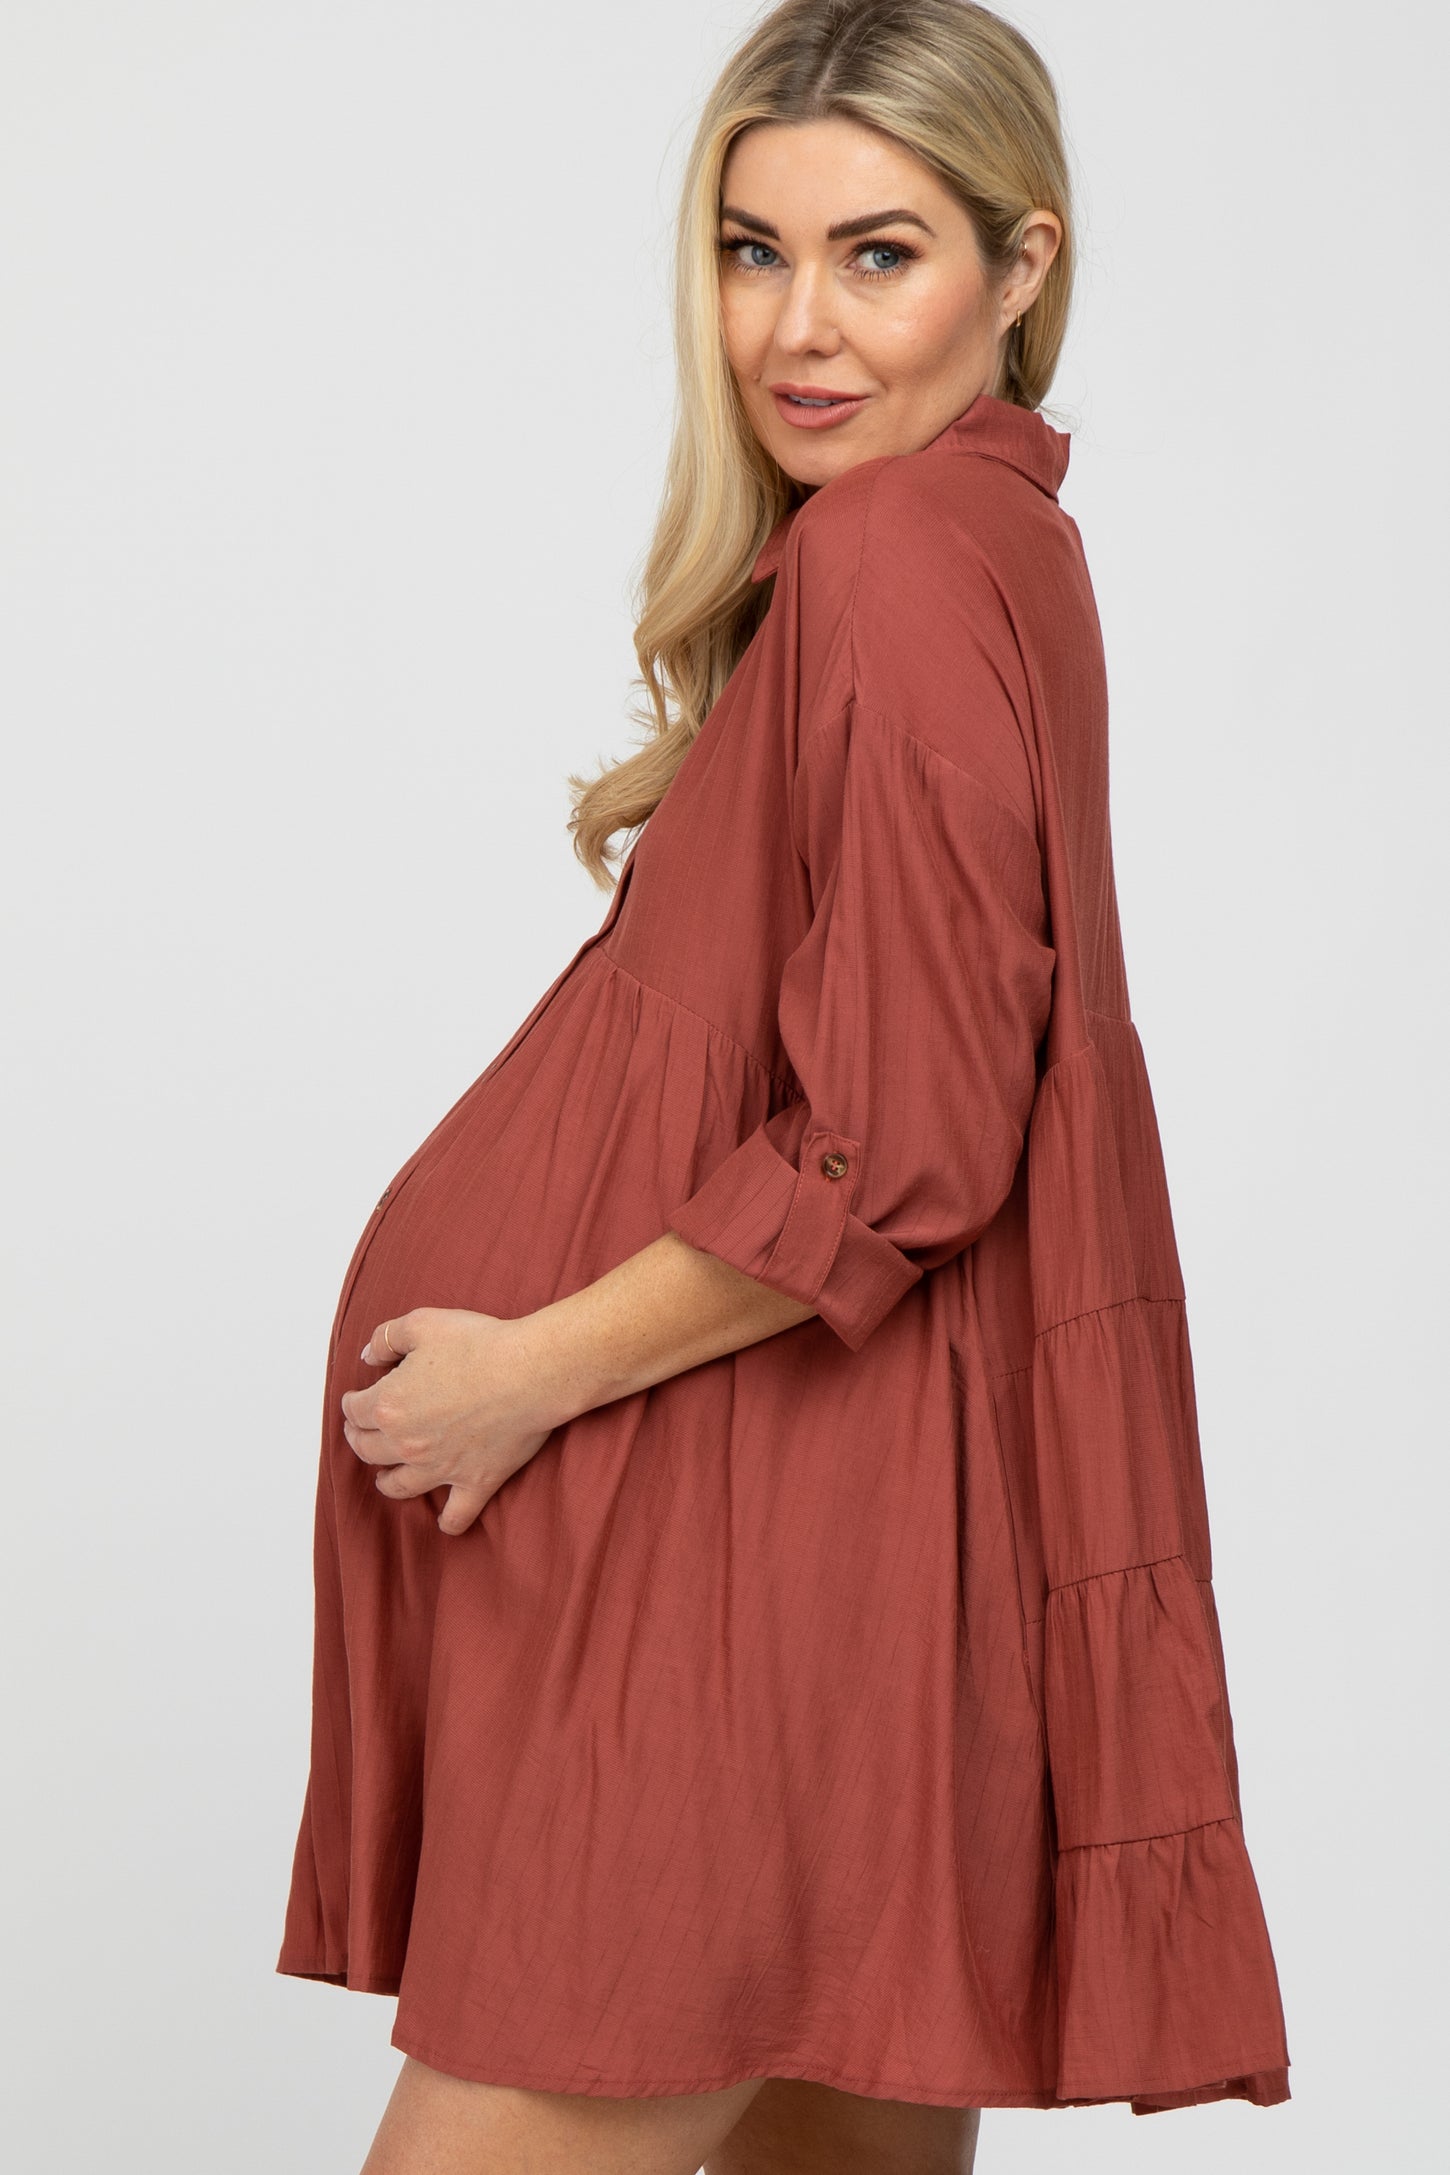 Rust Button Front Collared Maternity Dress